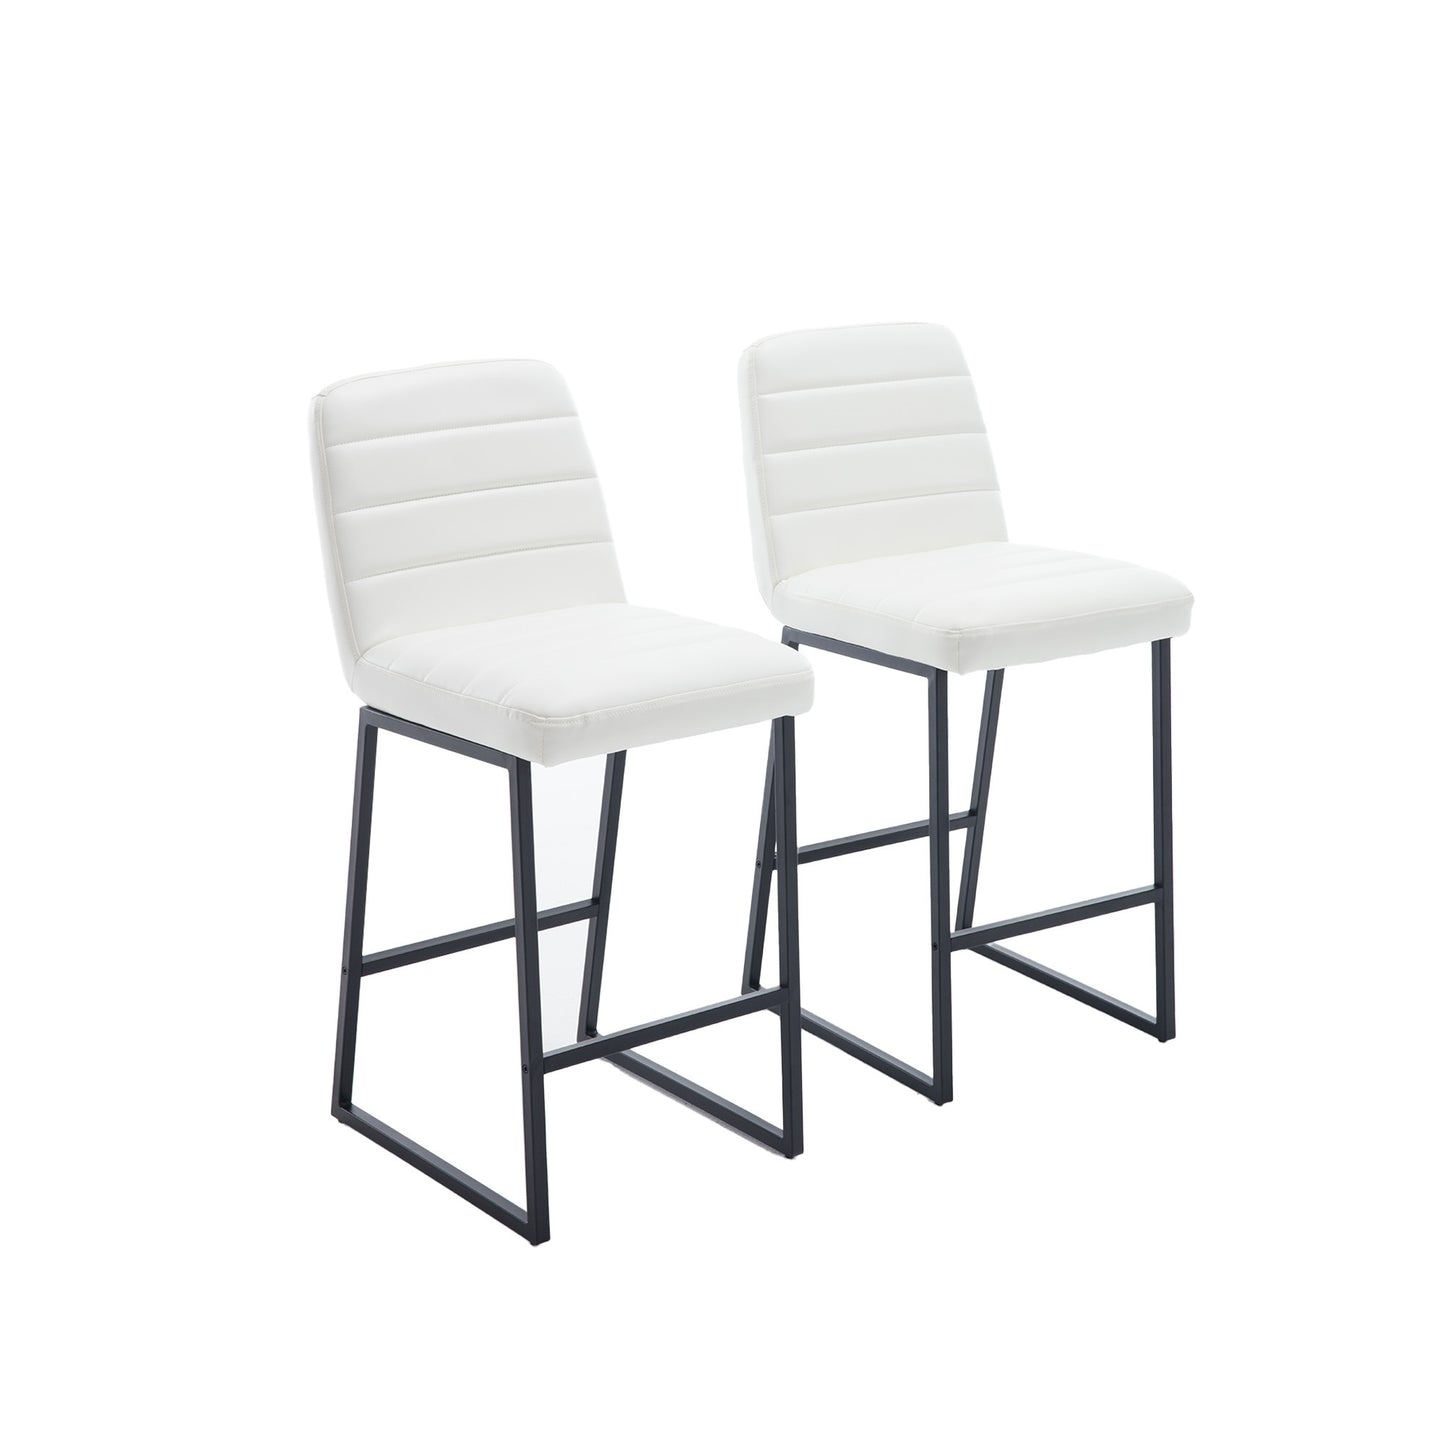 1st Choice Modern Cream Upholstered Kitchen Low Bar Stools Set of 2